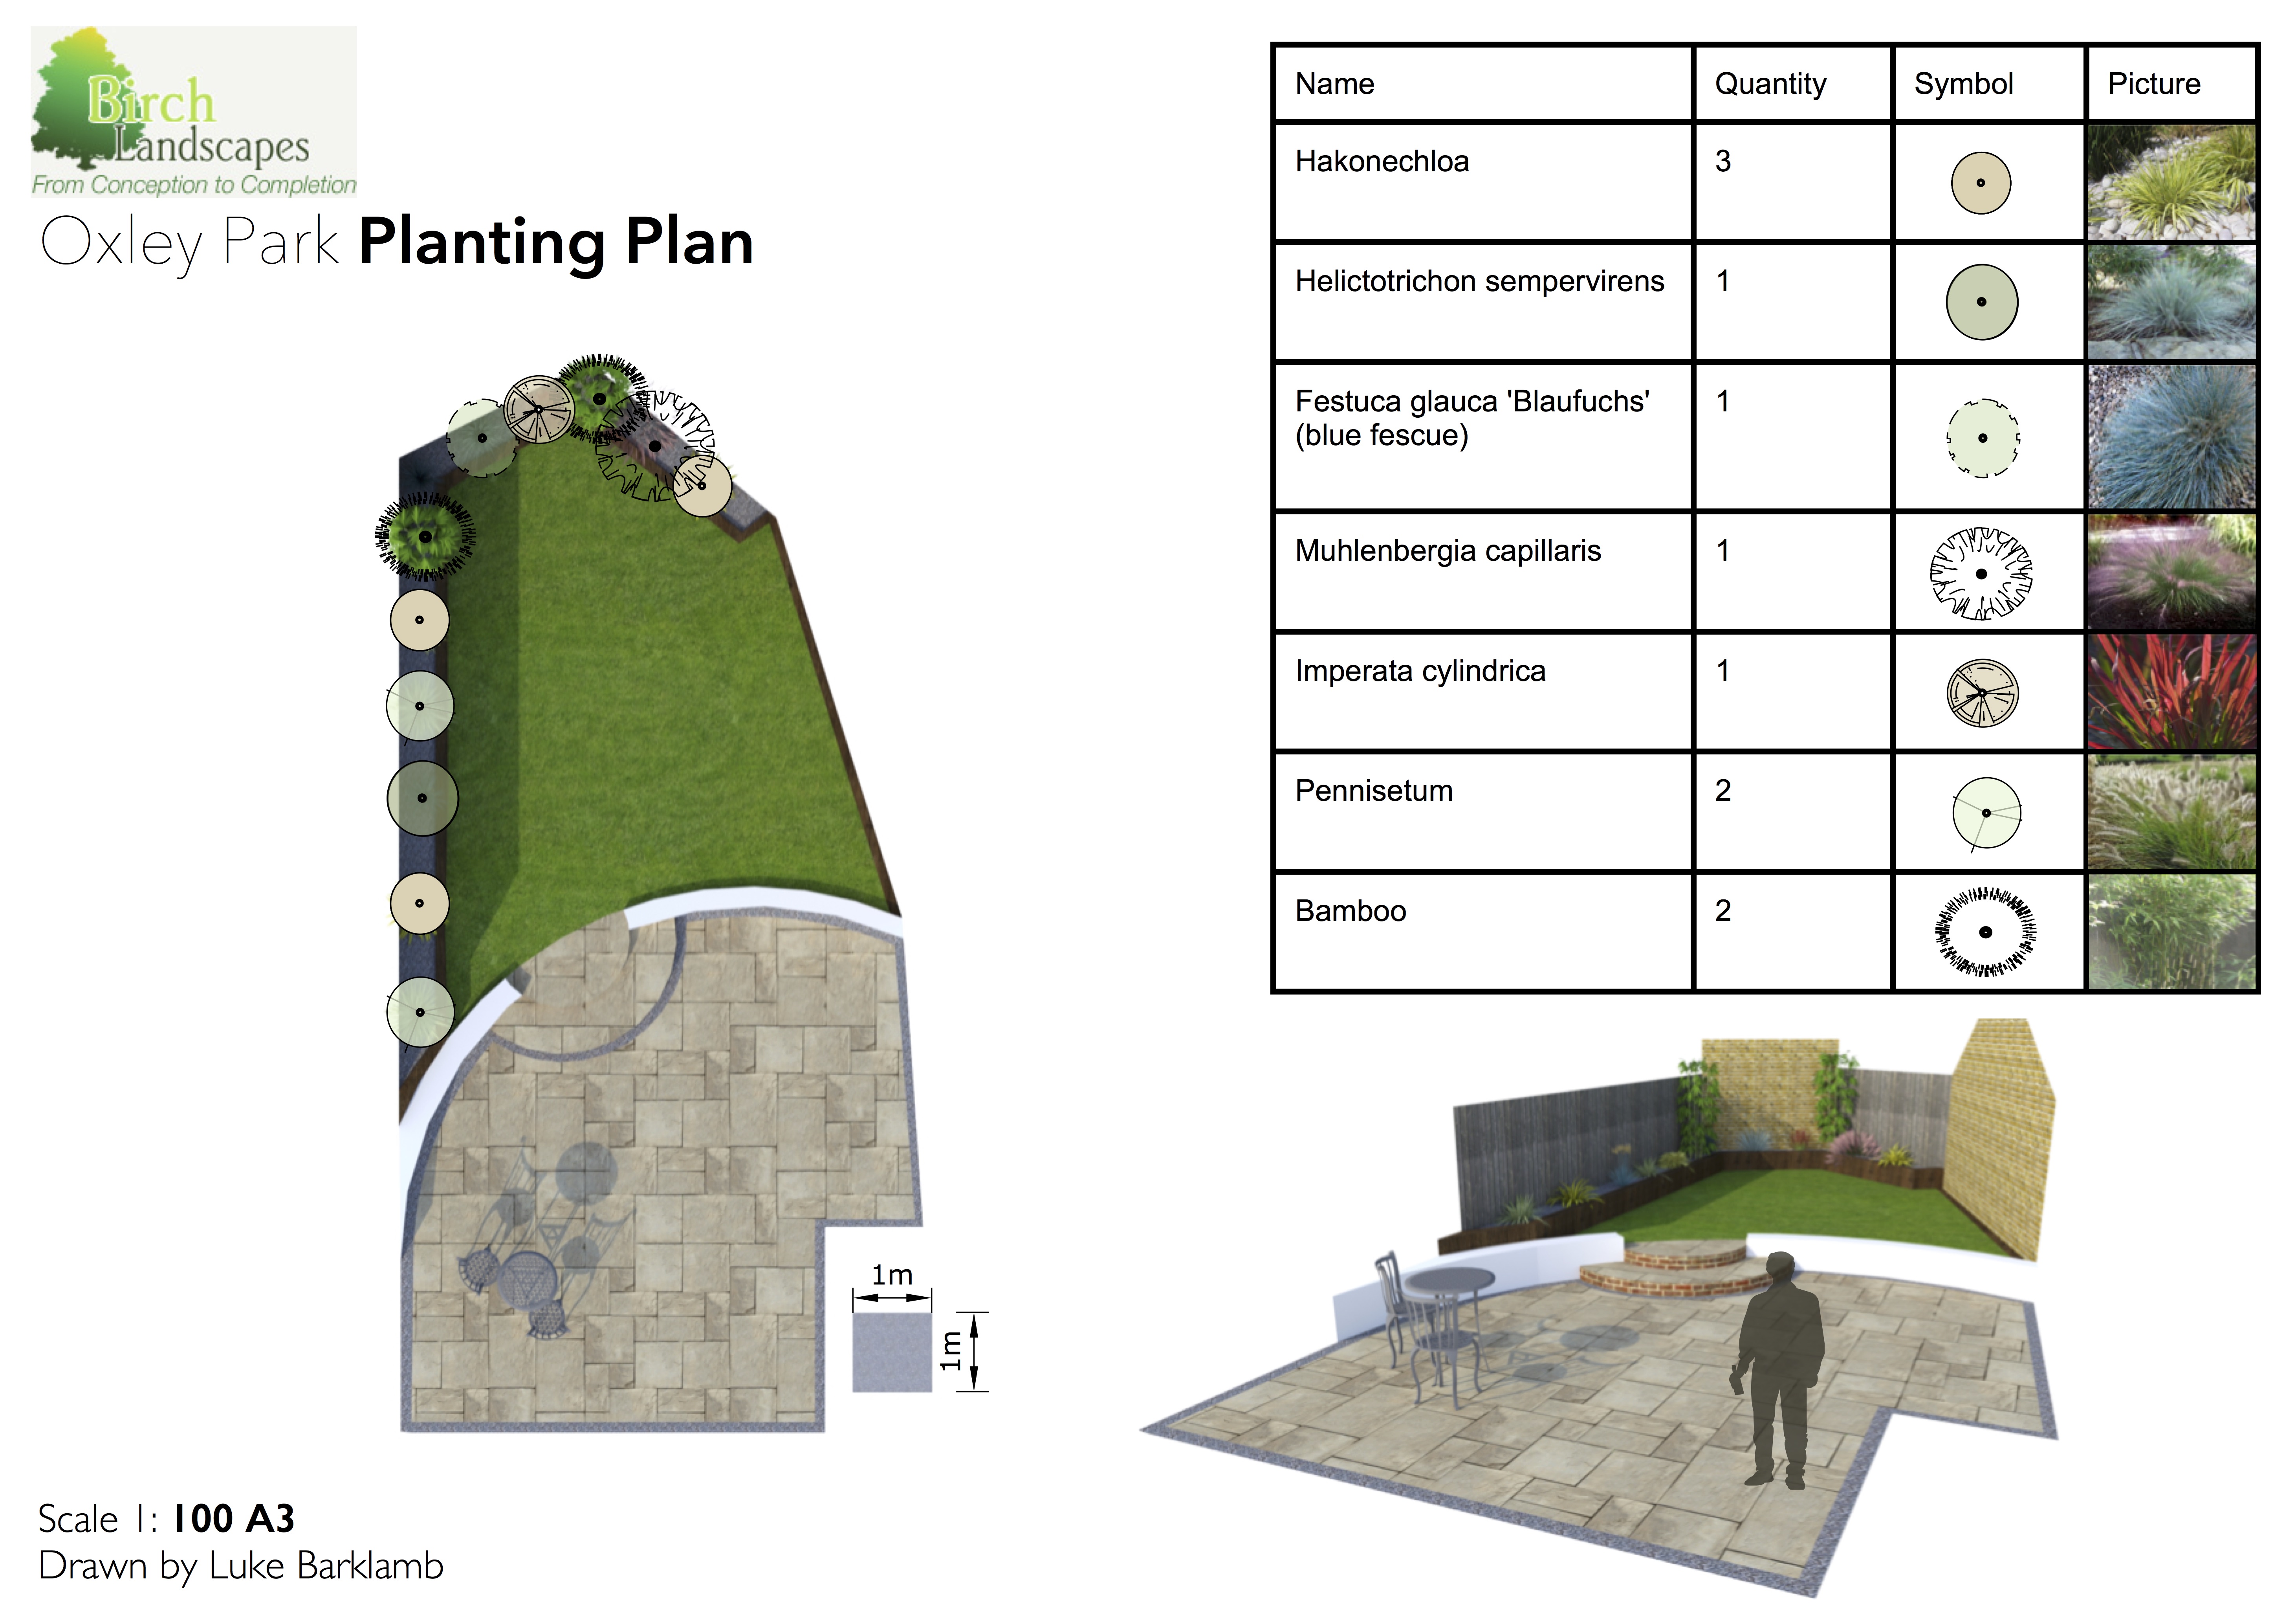 Oxley Park Planting Plan